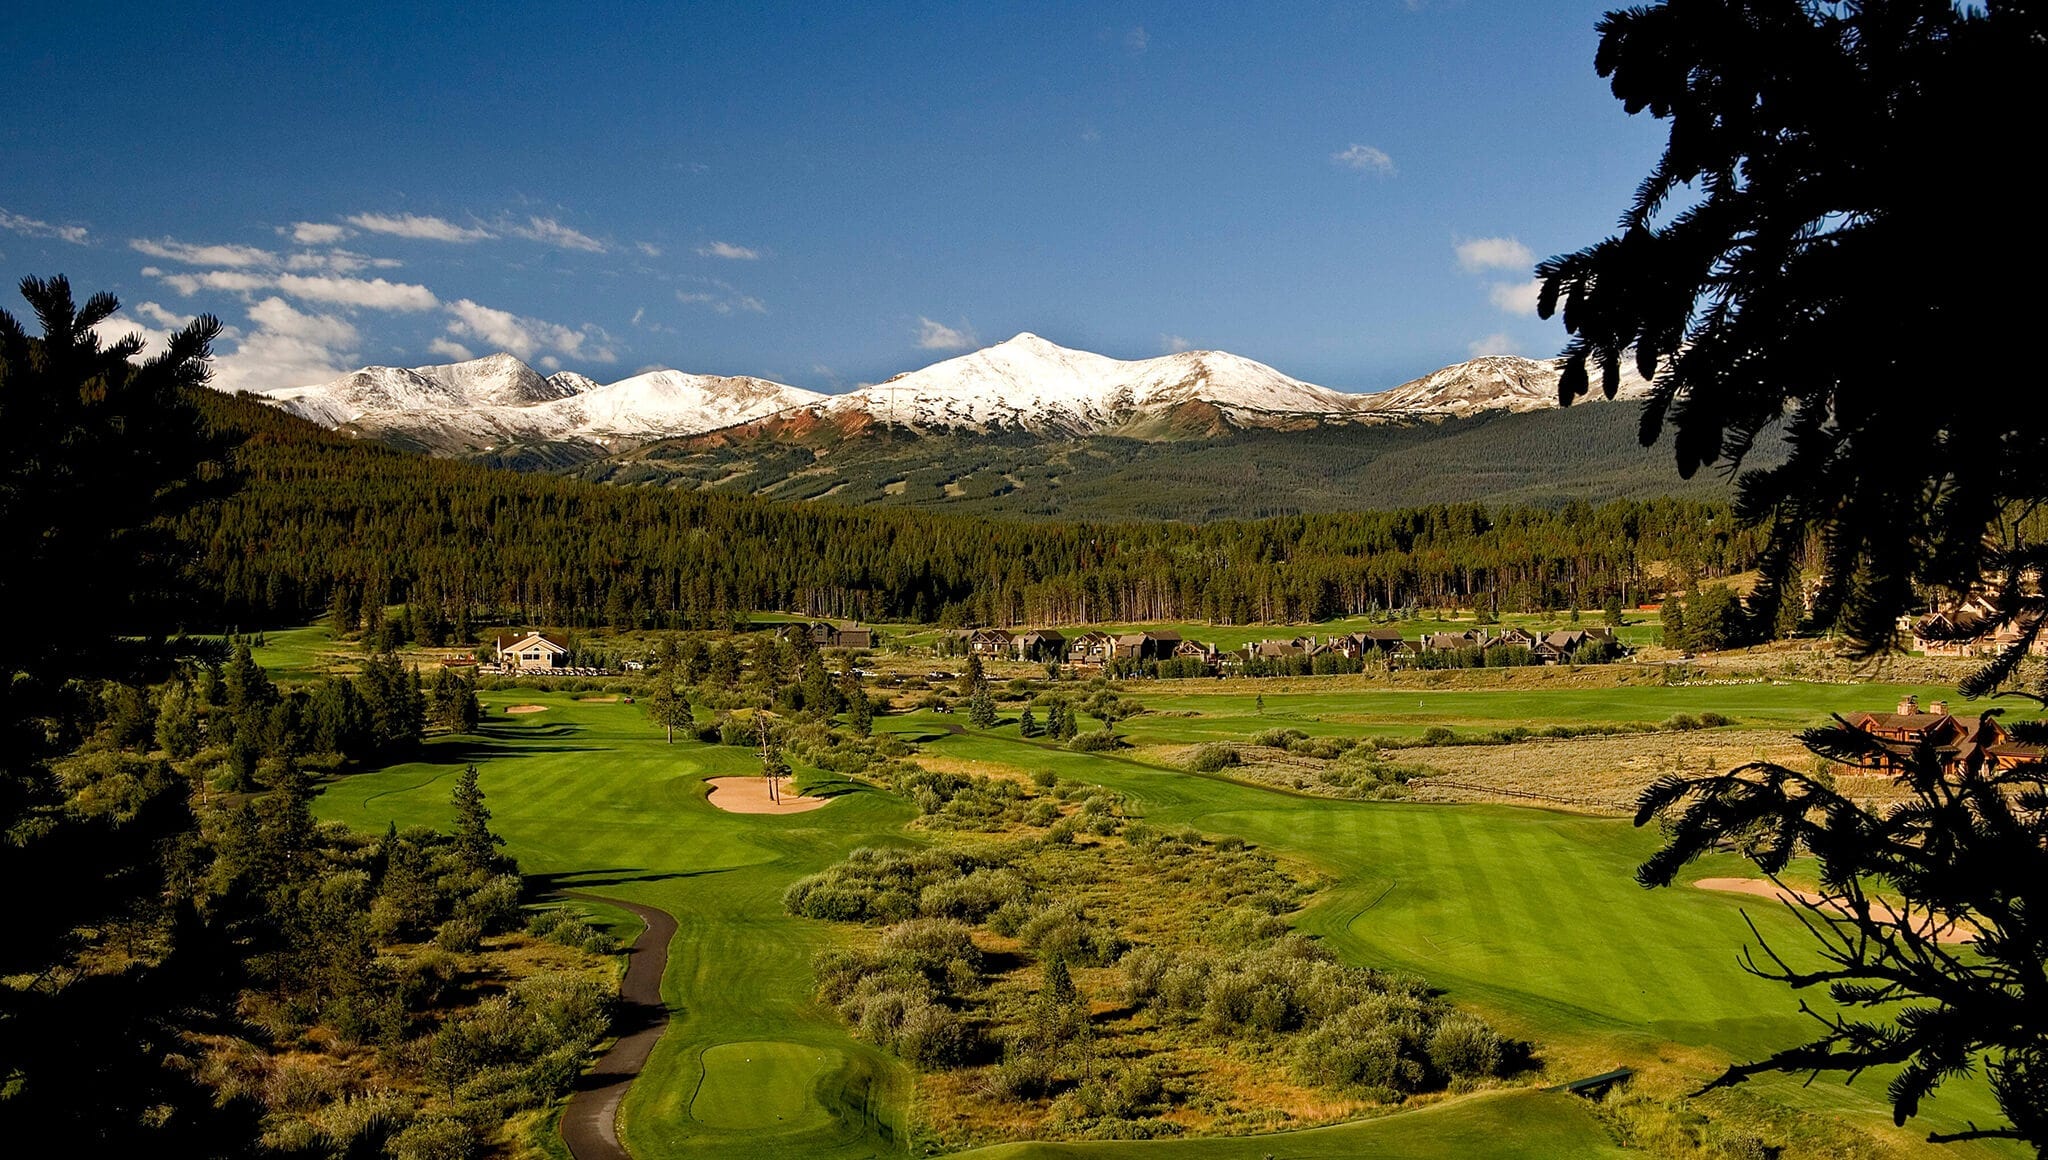 Overview of Breckenridge Golf Club with mountains in background.